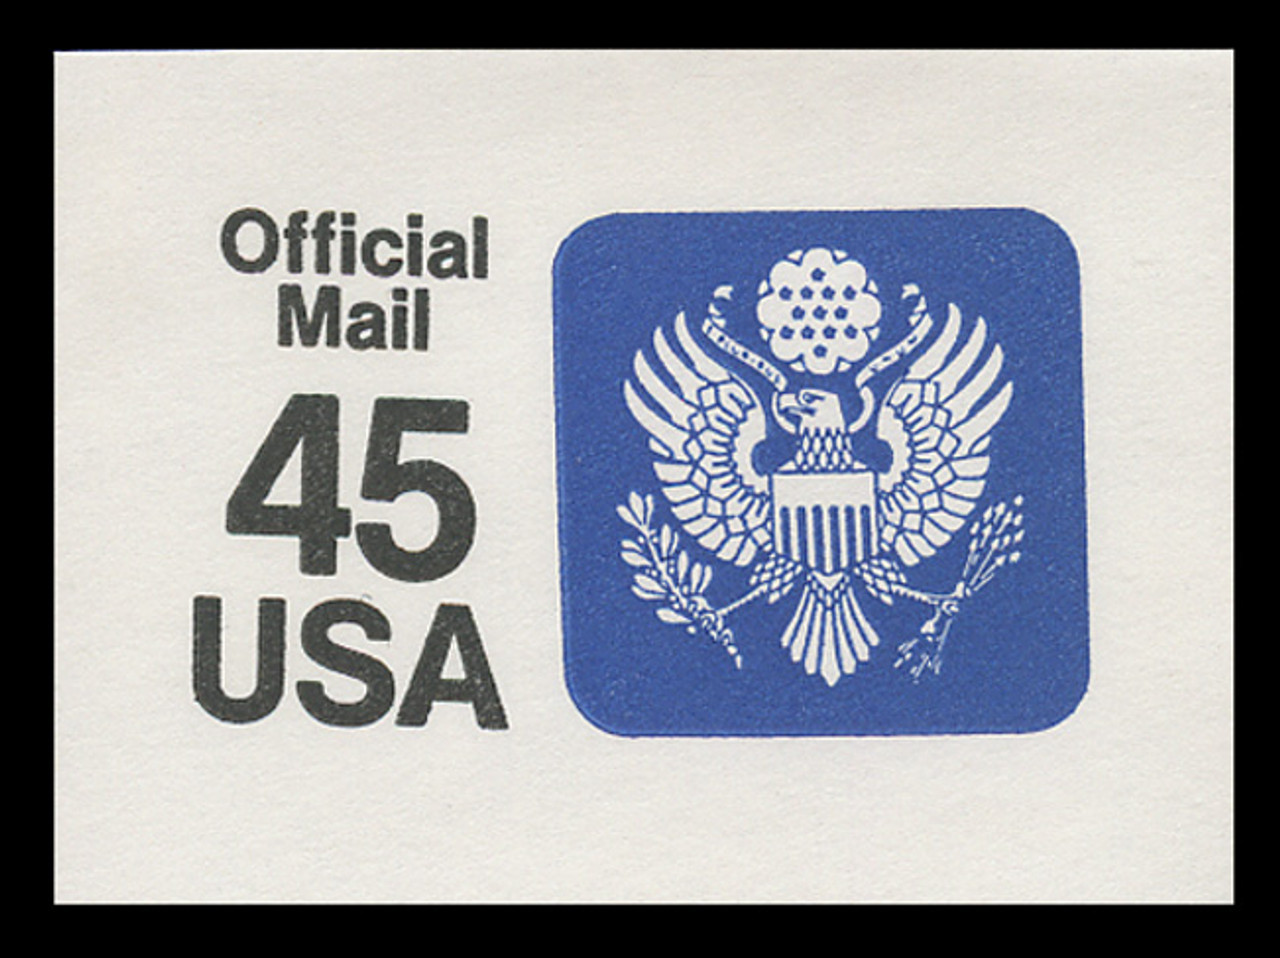 USA Scott # UO  79 1990 45c Official Mail, small lettering illegible - Mint Cut Square